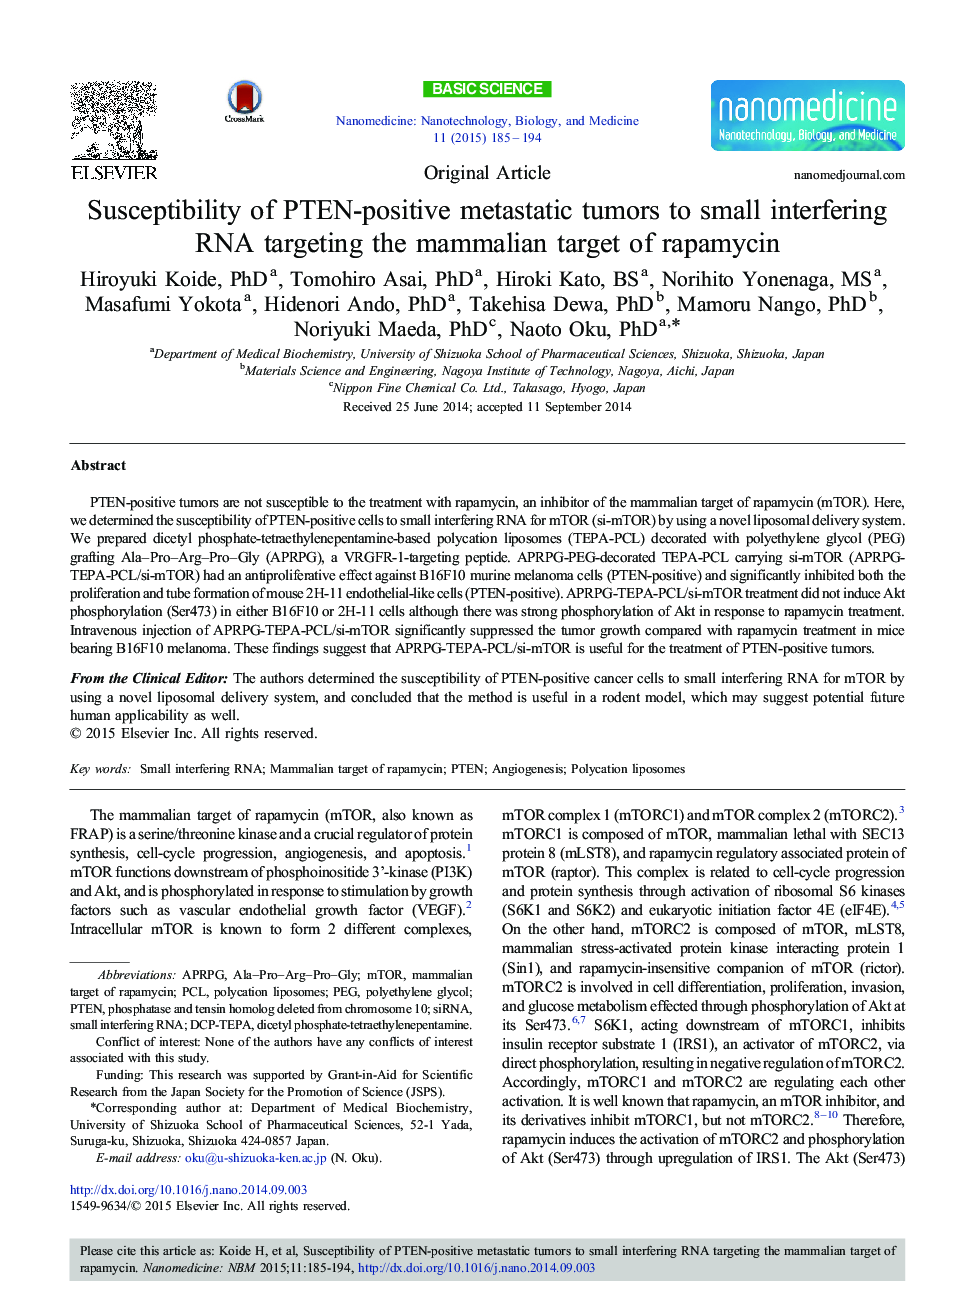 Susceptibility of PTEN-positive metastatic tumors to small interfering RNA targeting the mammalian target of rapamycin 